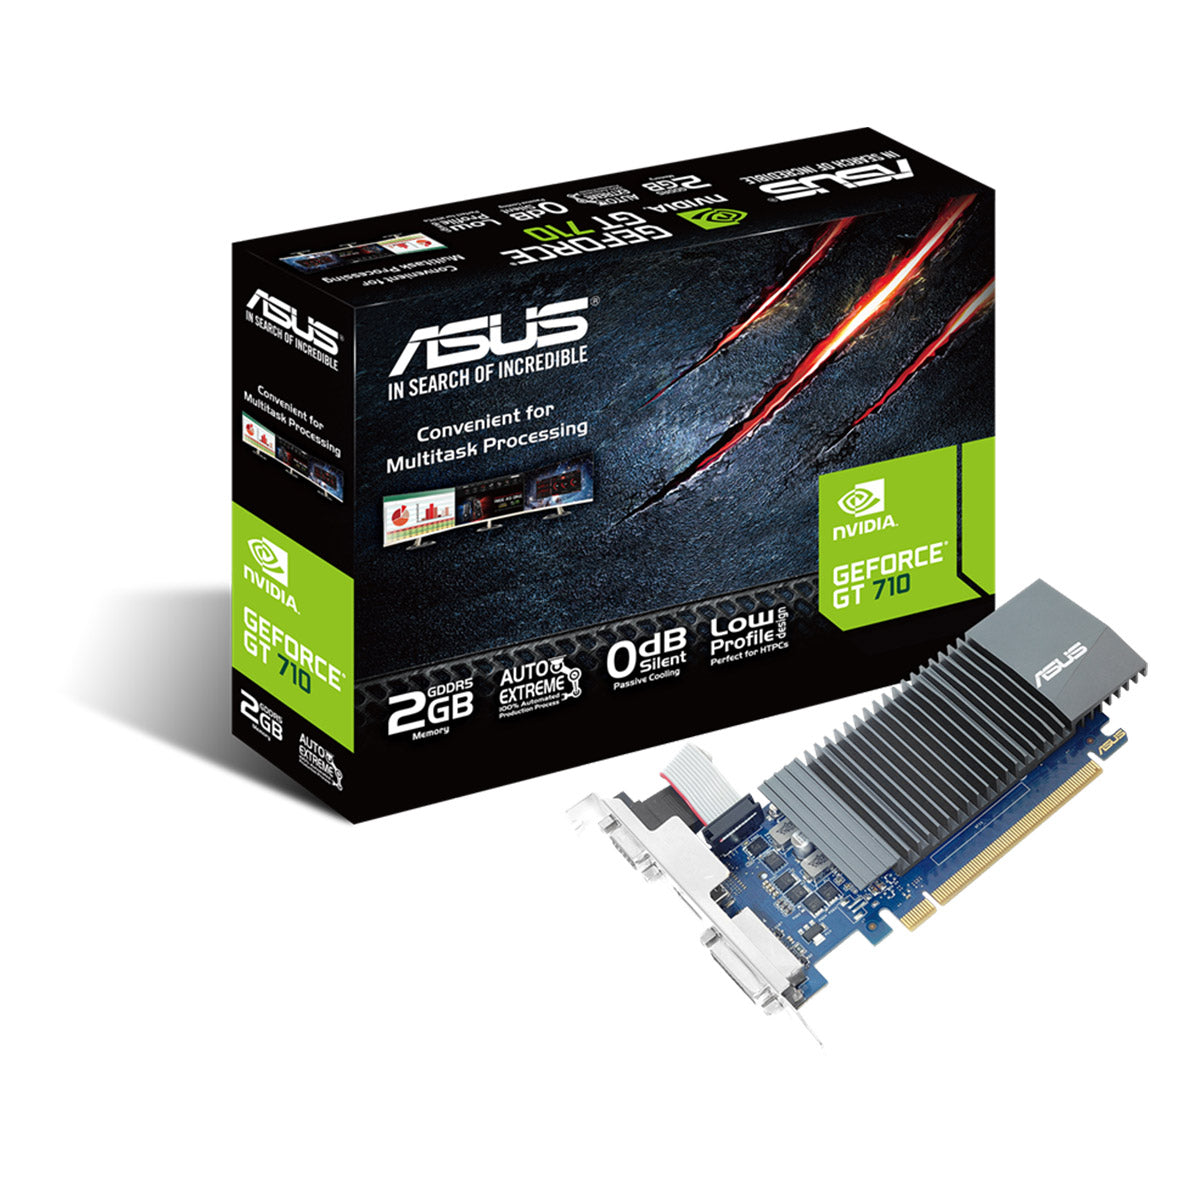 [RePacked] ASUS GeForce GT710 2GB GDDR5 64-Bit Graphics Card with 0db Low Profile